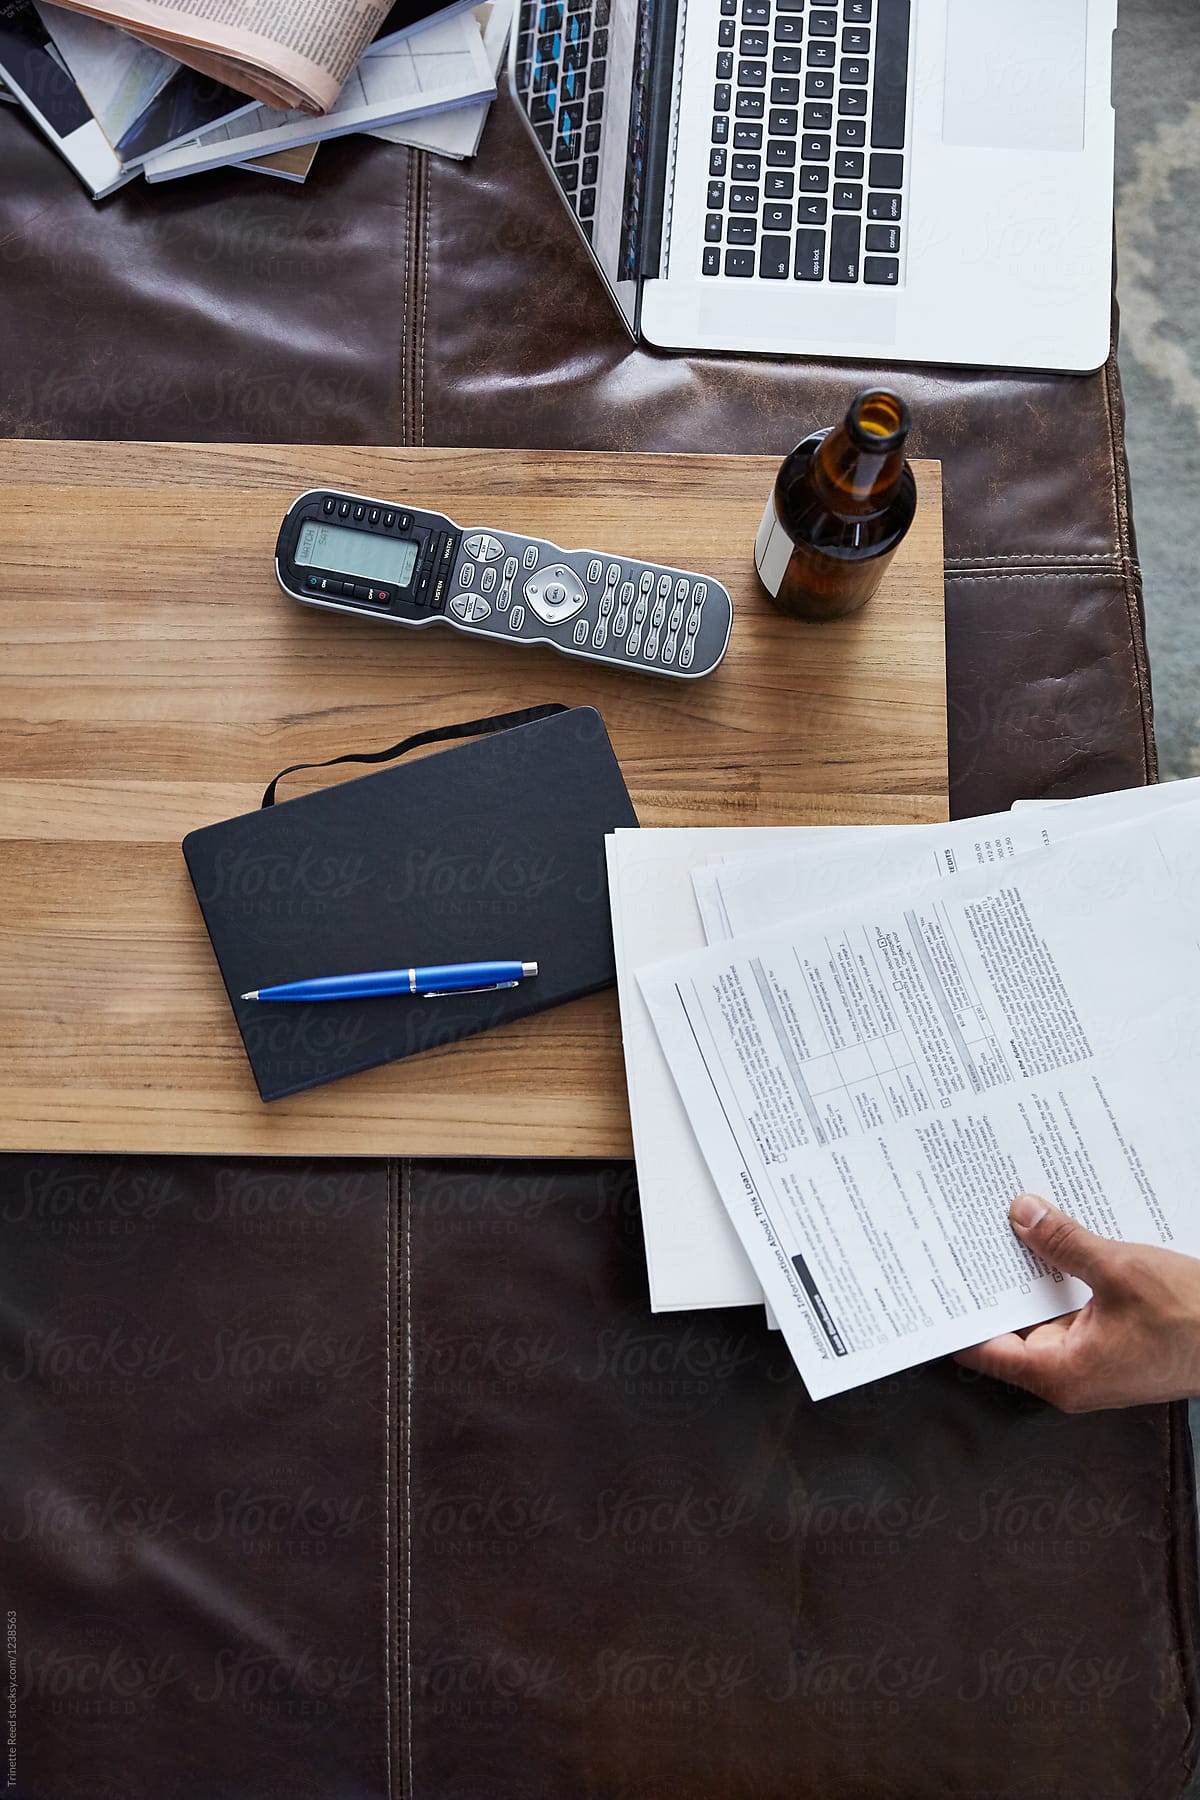 Mortgage contract with laptop, beer, notebook, and remote control in living room.